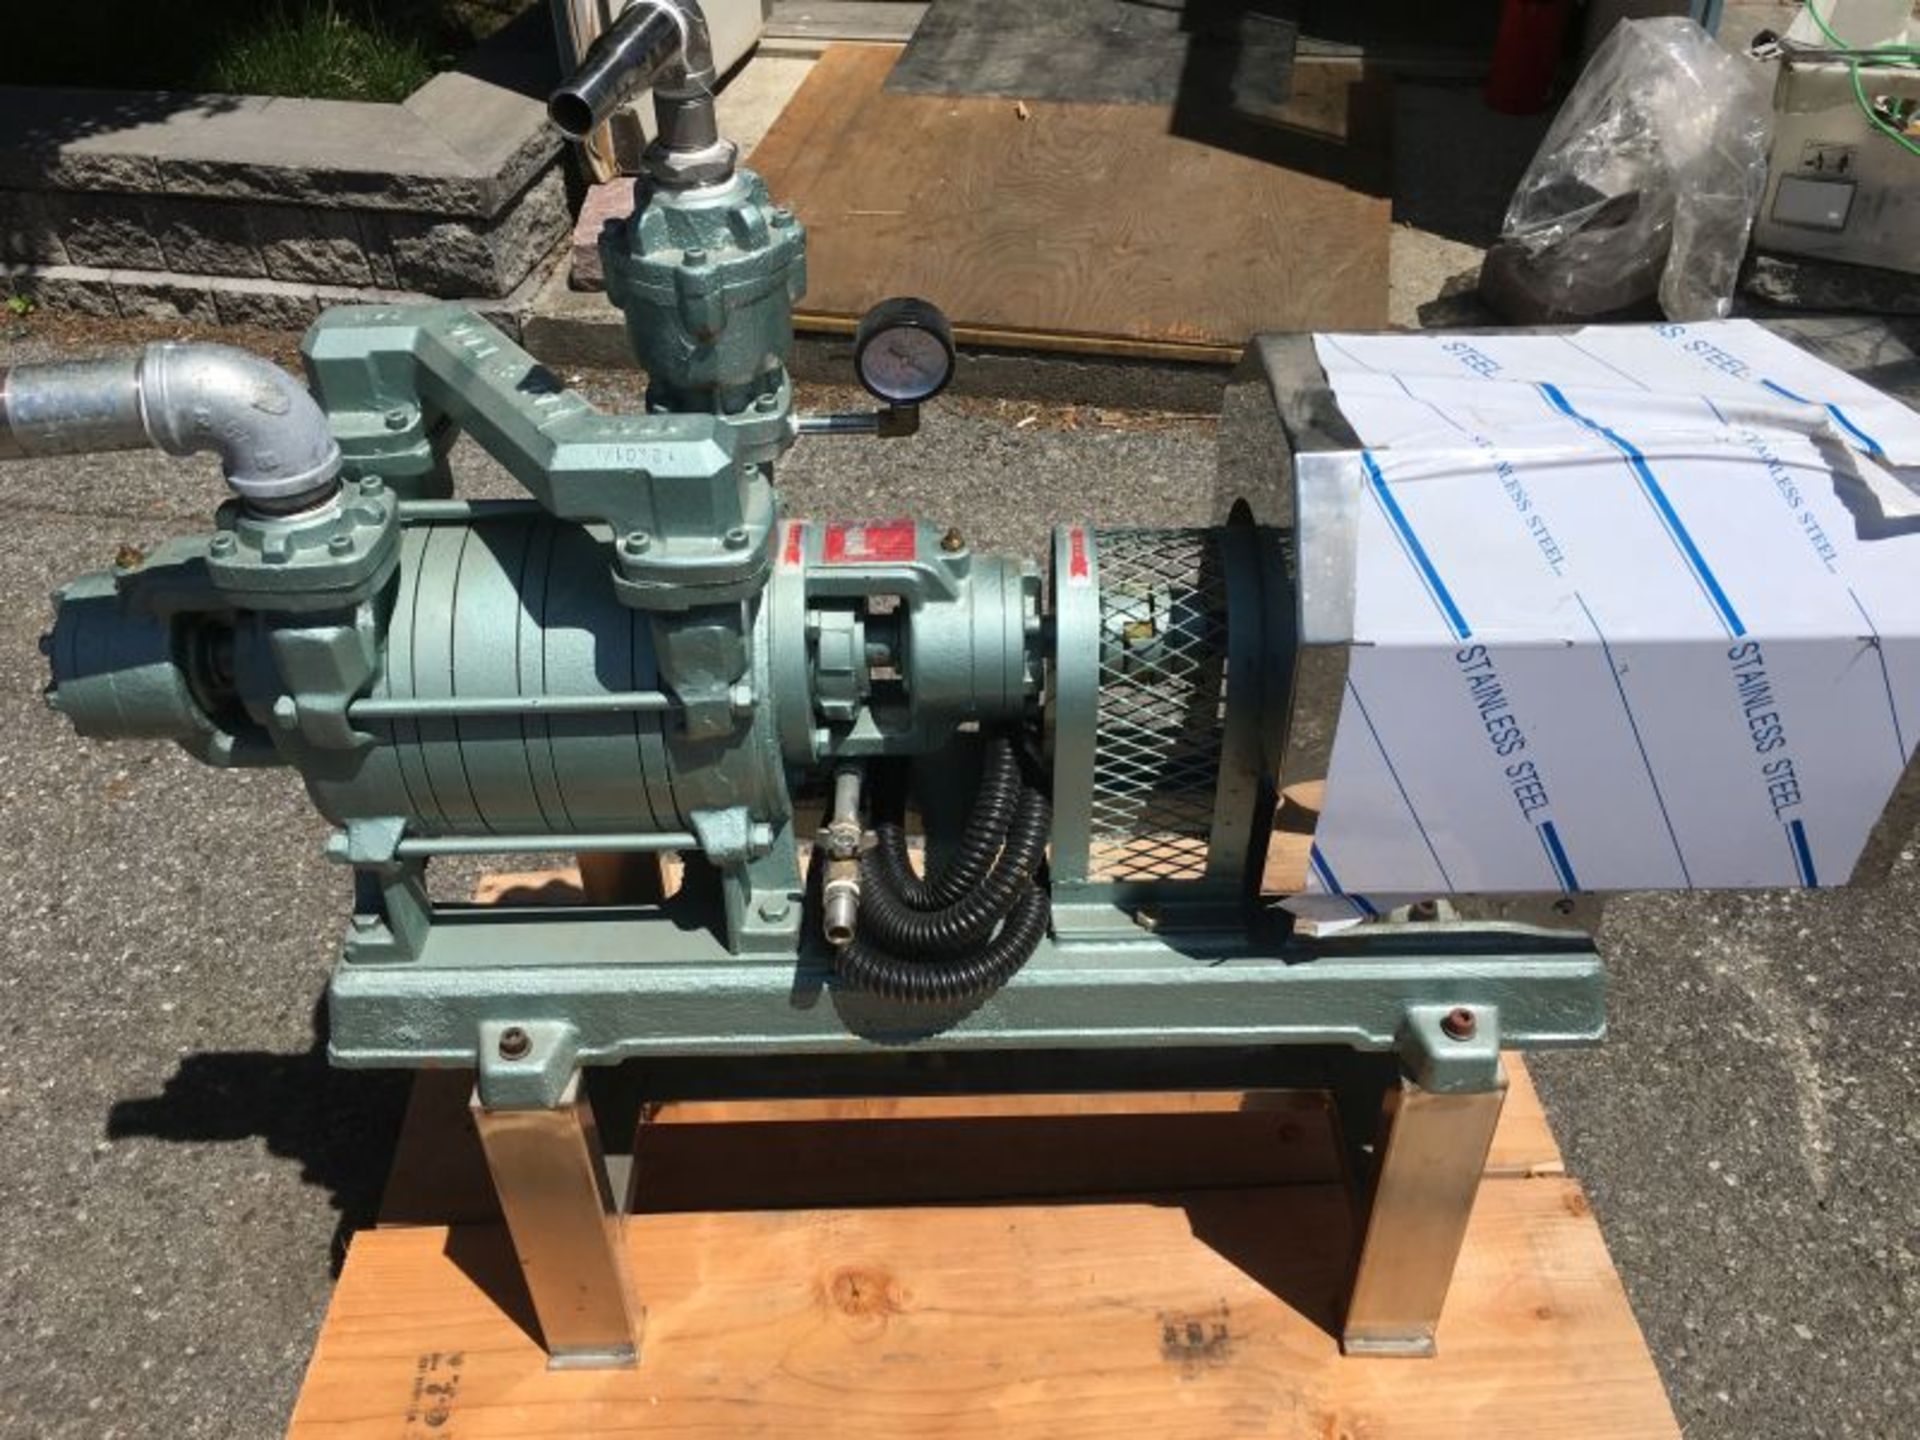 SWPL Vacuum Pump. Model 030V, Rated at 1500 Liters/Minute, driven by a 3 HP motor. (Located in New